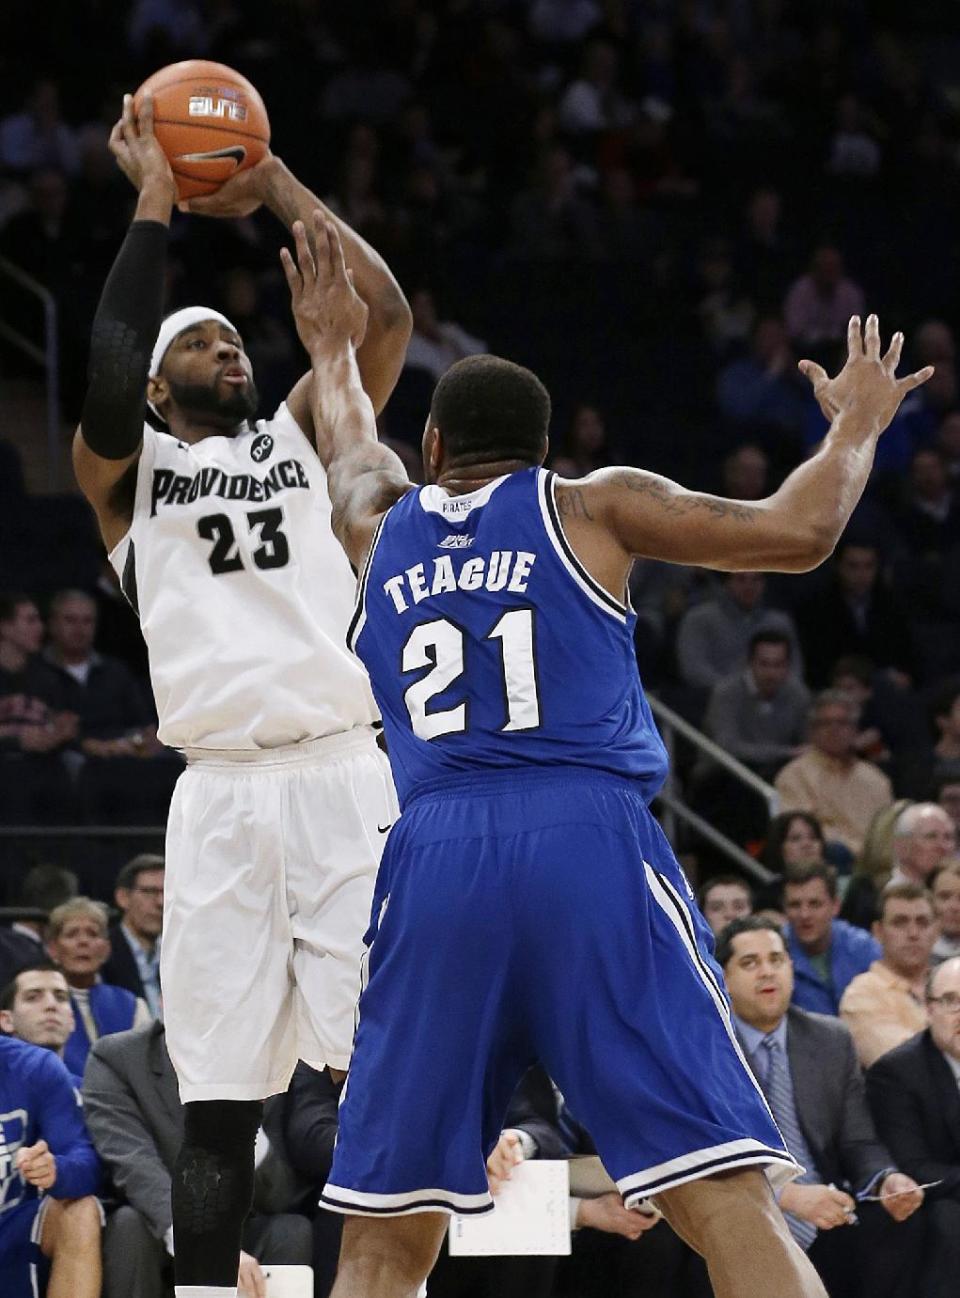 Providence's LaDontae Henton (23) shoots over Seton Hall's Eugene Teague (21) during the first half of an NCAA college basketball game in the semifinals of the Big East Conference men's tournament Friday, March 14, 2014, at Madison Square Garden in New York. (AP Photo/Frank Franklin II)